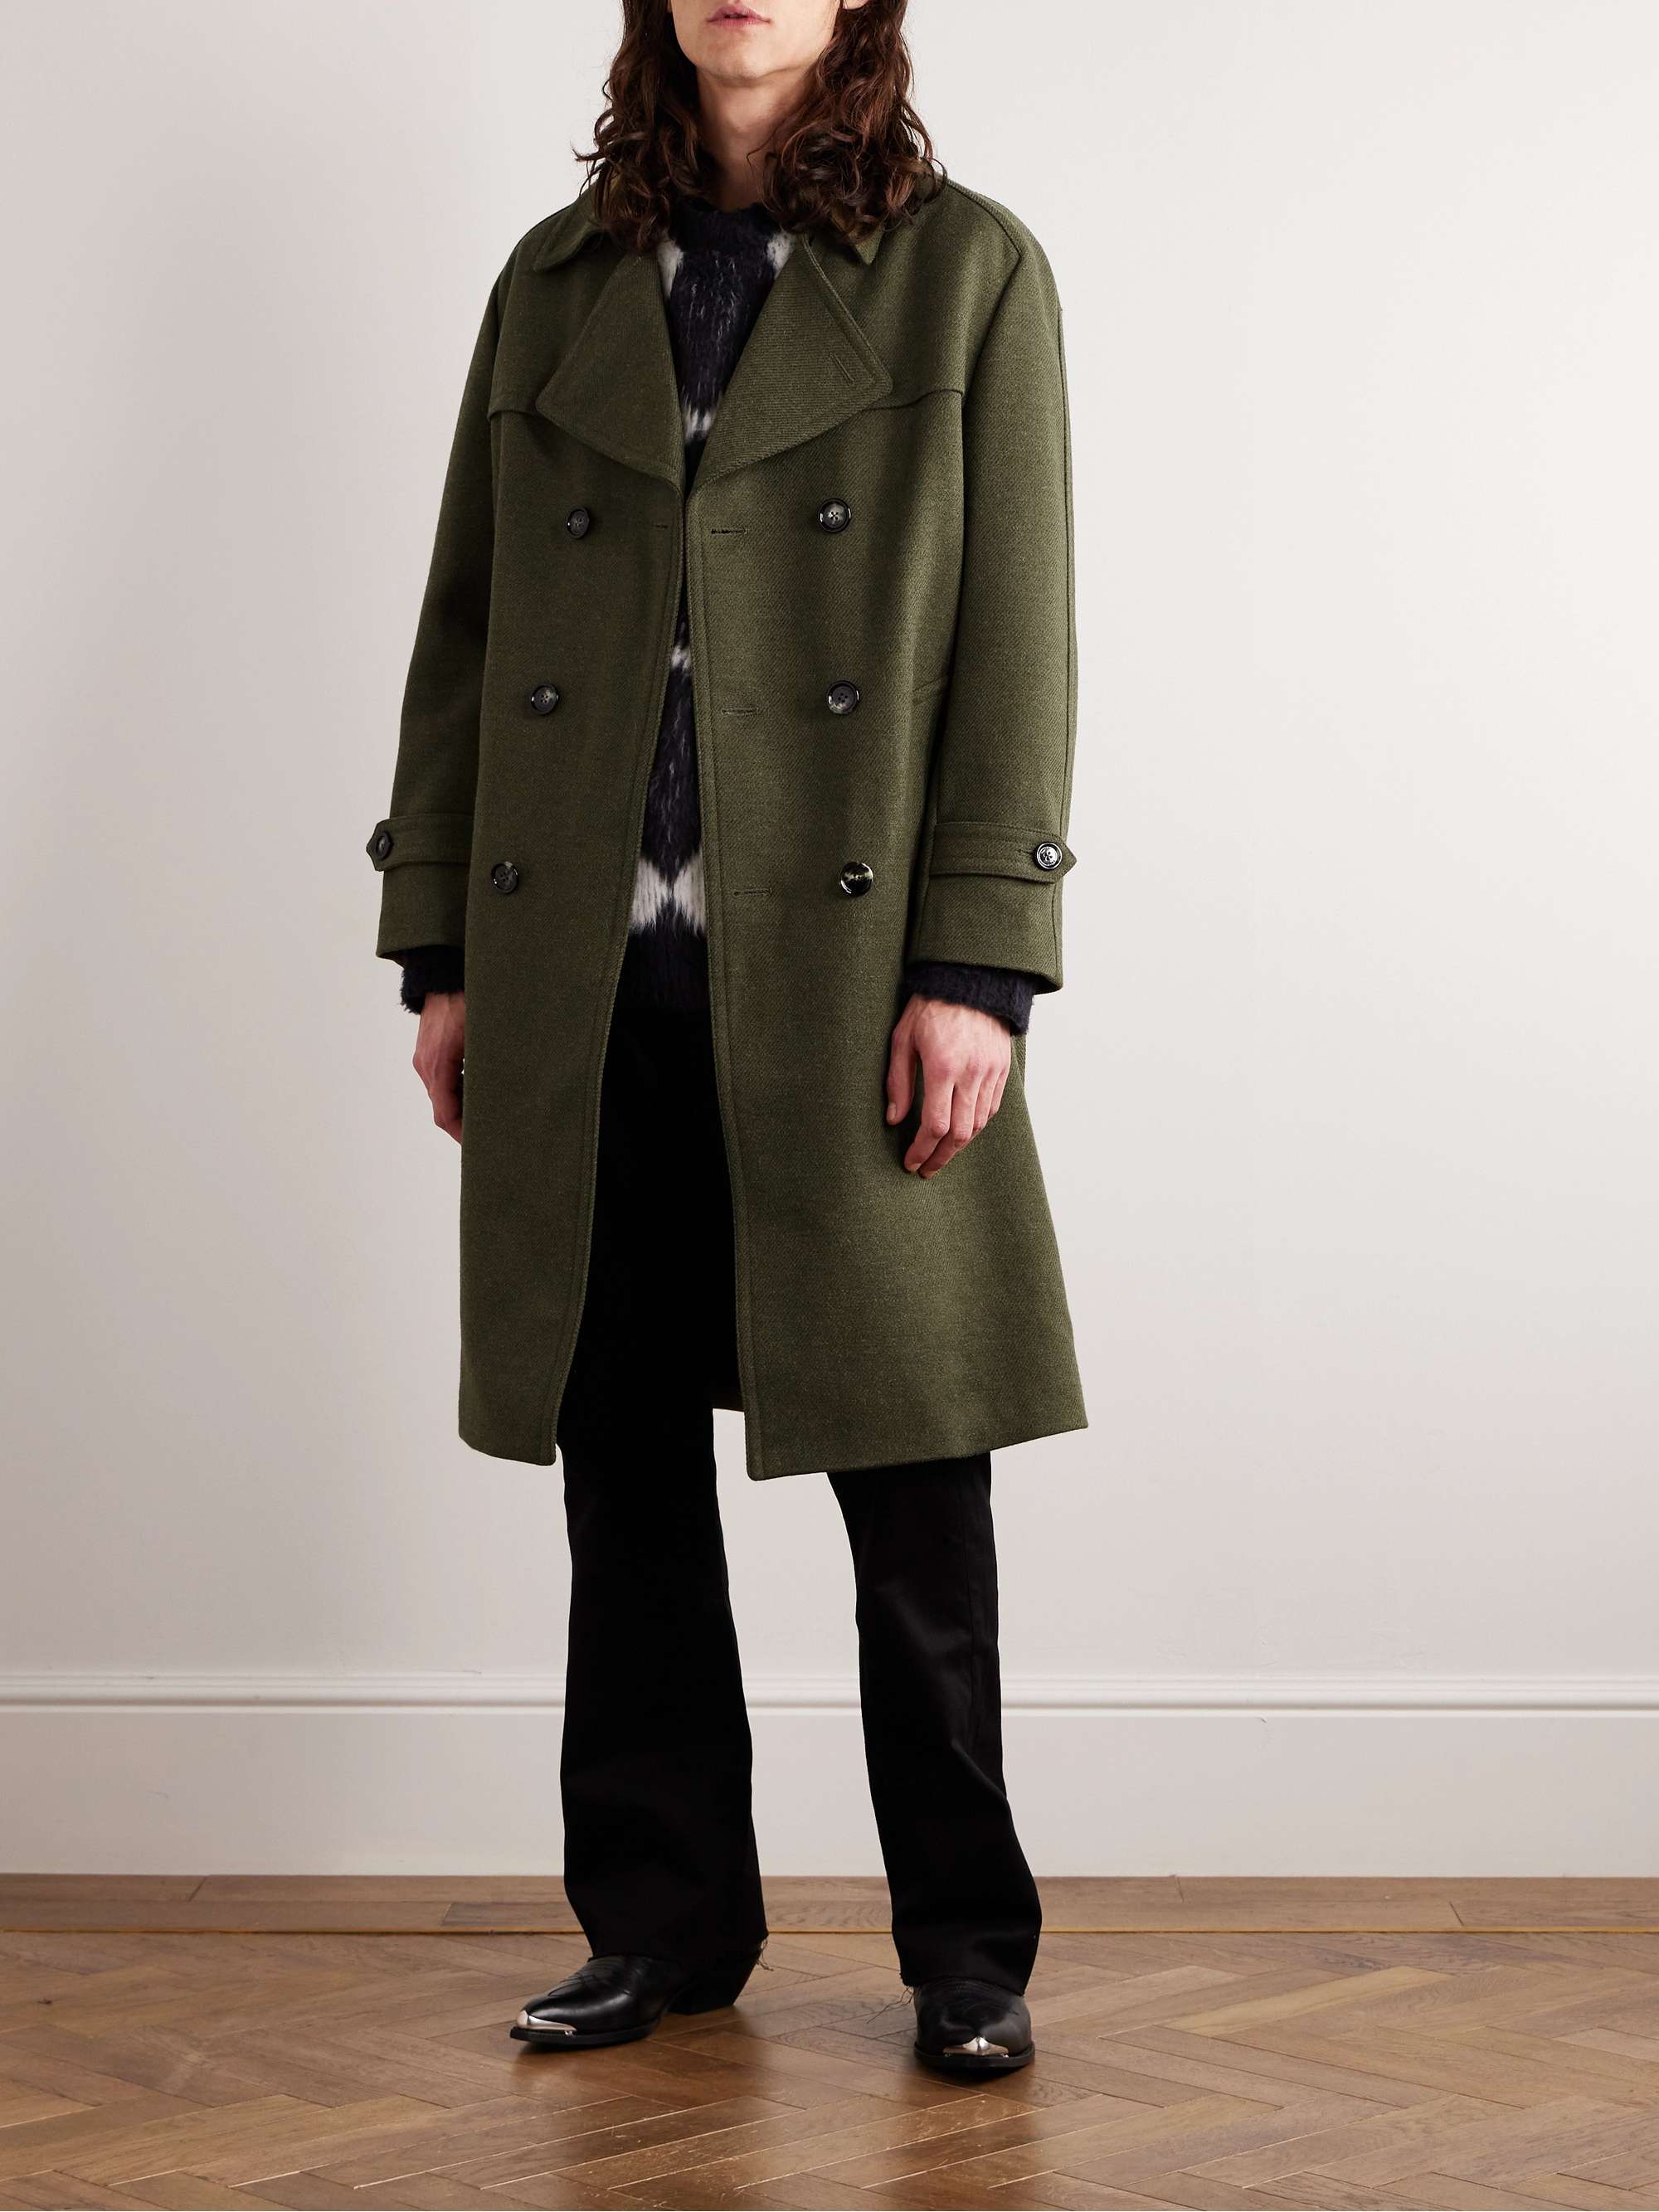 CELINE HOMME Oversized Double-Breasted Wool Trench Coat | MR PORTER